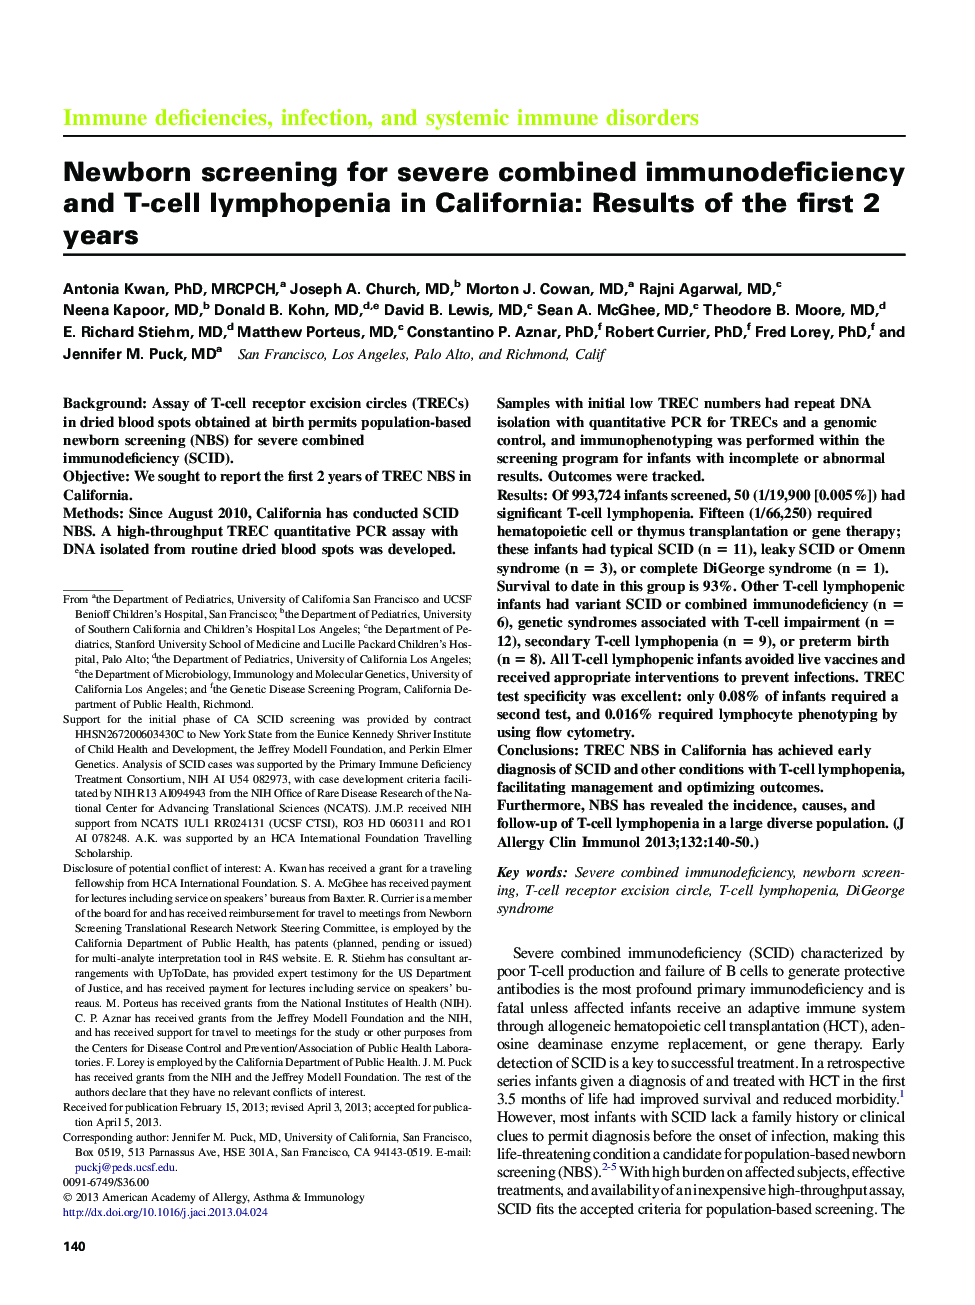 Newborn screening for severe combined immunodeficiency and T-cell lymphopenia in California: Results of the first 2 years